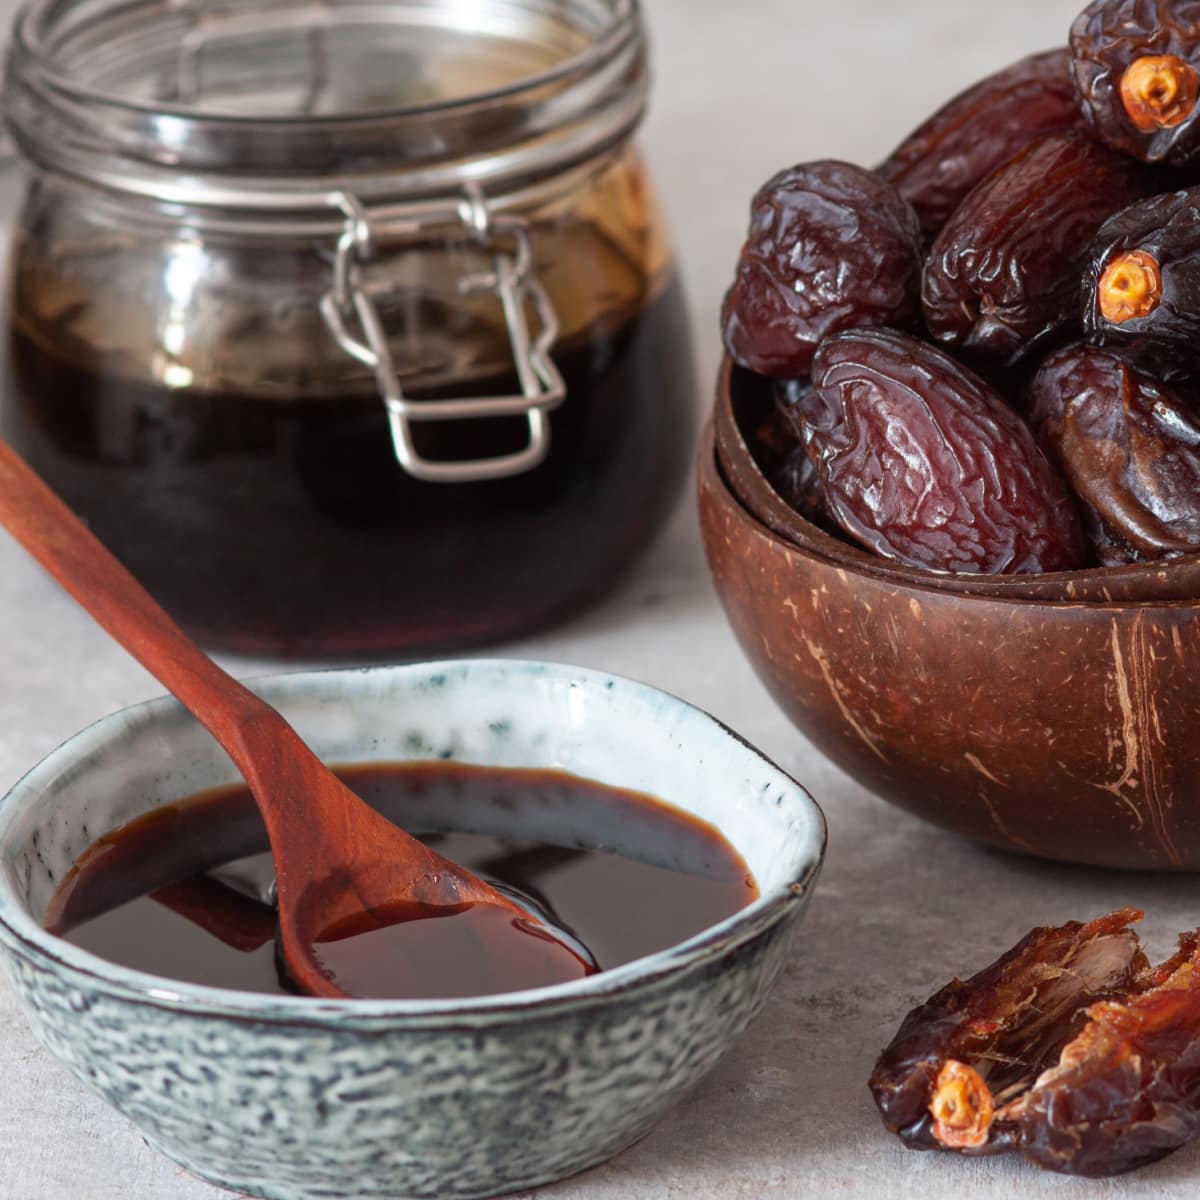 Date Syrup in a Bowl with Dates on Background